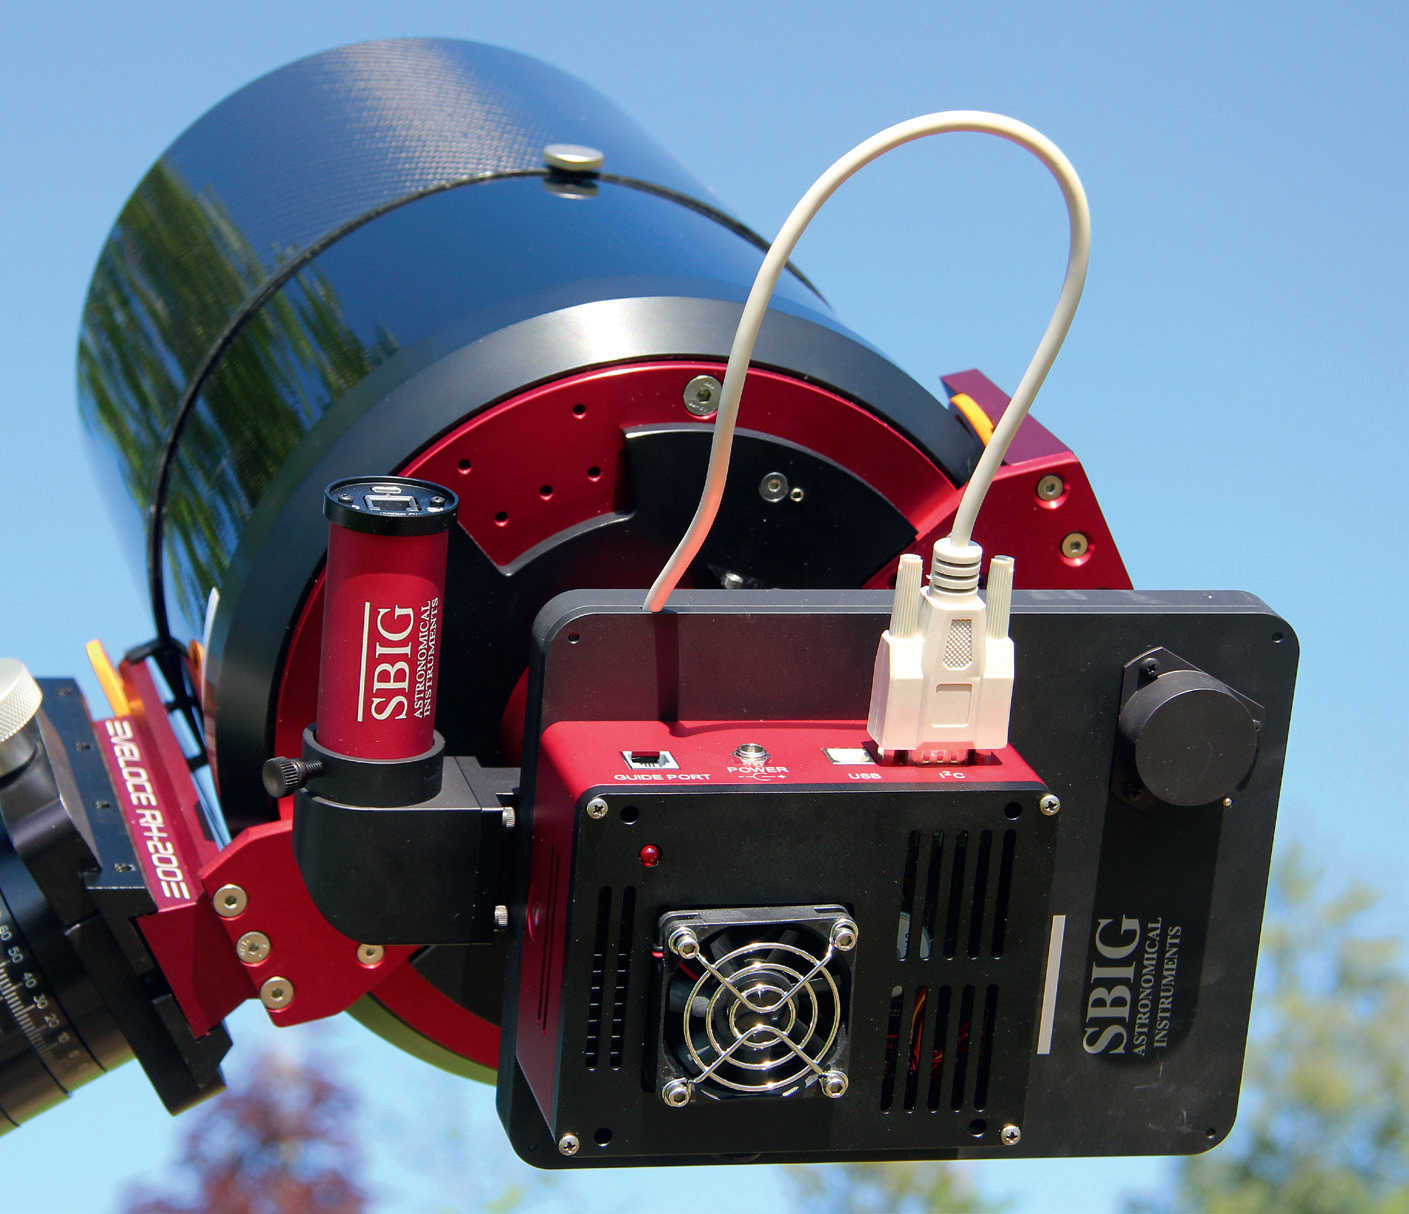 A cooled CCD camera on an astrograph: the black filter wheel can be seen between the telescope and the red/black camera, and a round red autoguider can be seen next to it, which is connected to the telescope's light path using an off-axis guider. U. Dittler